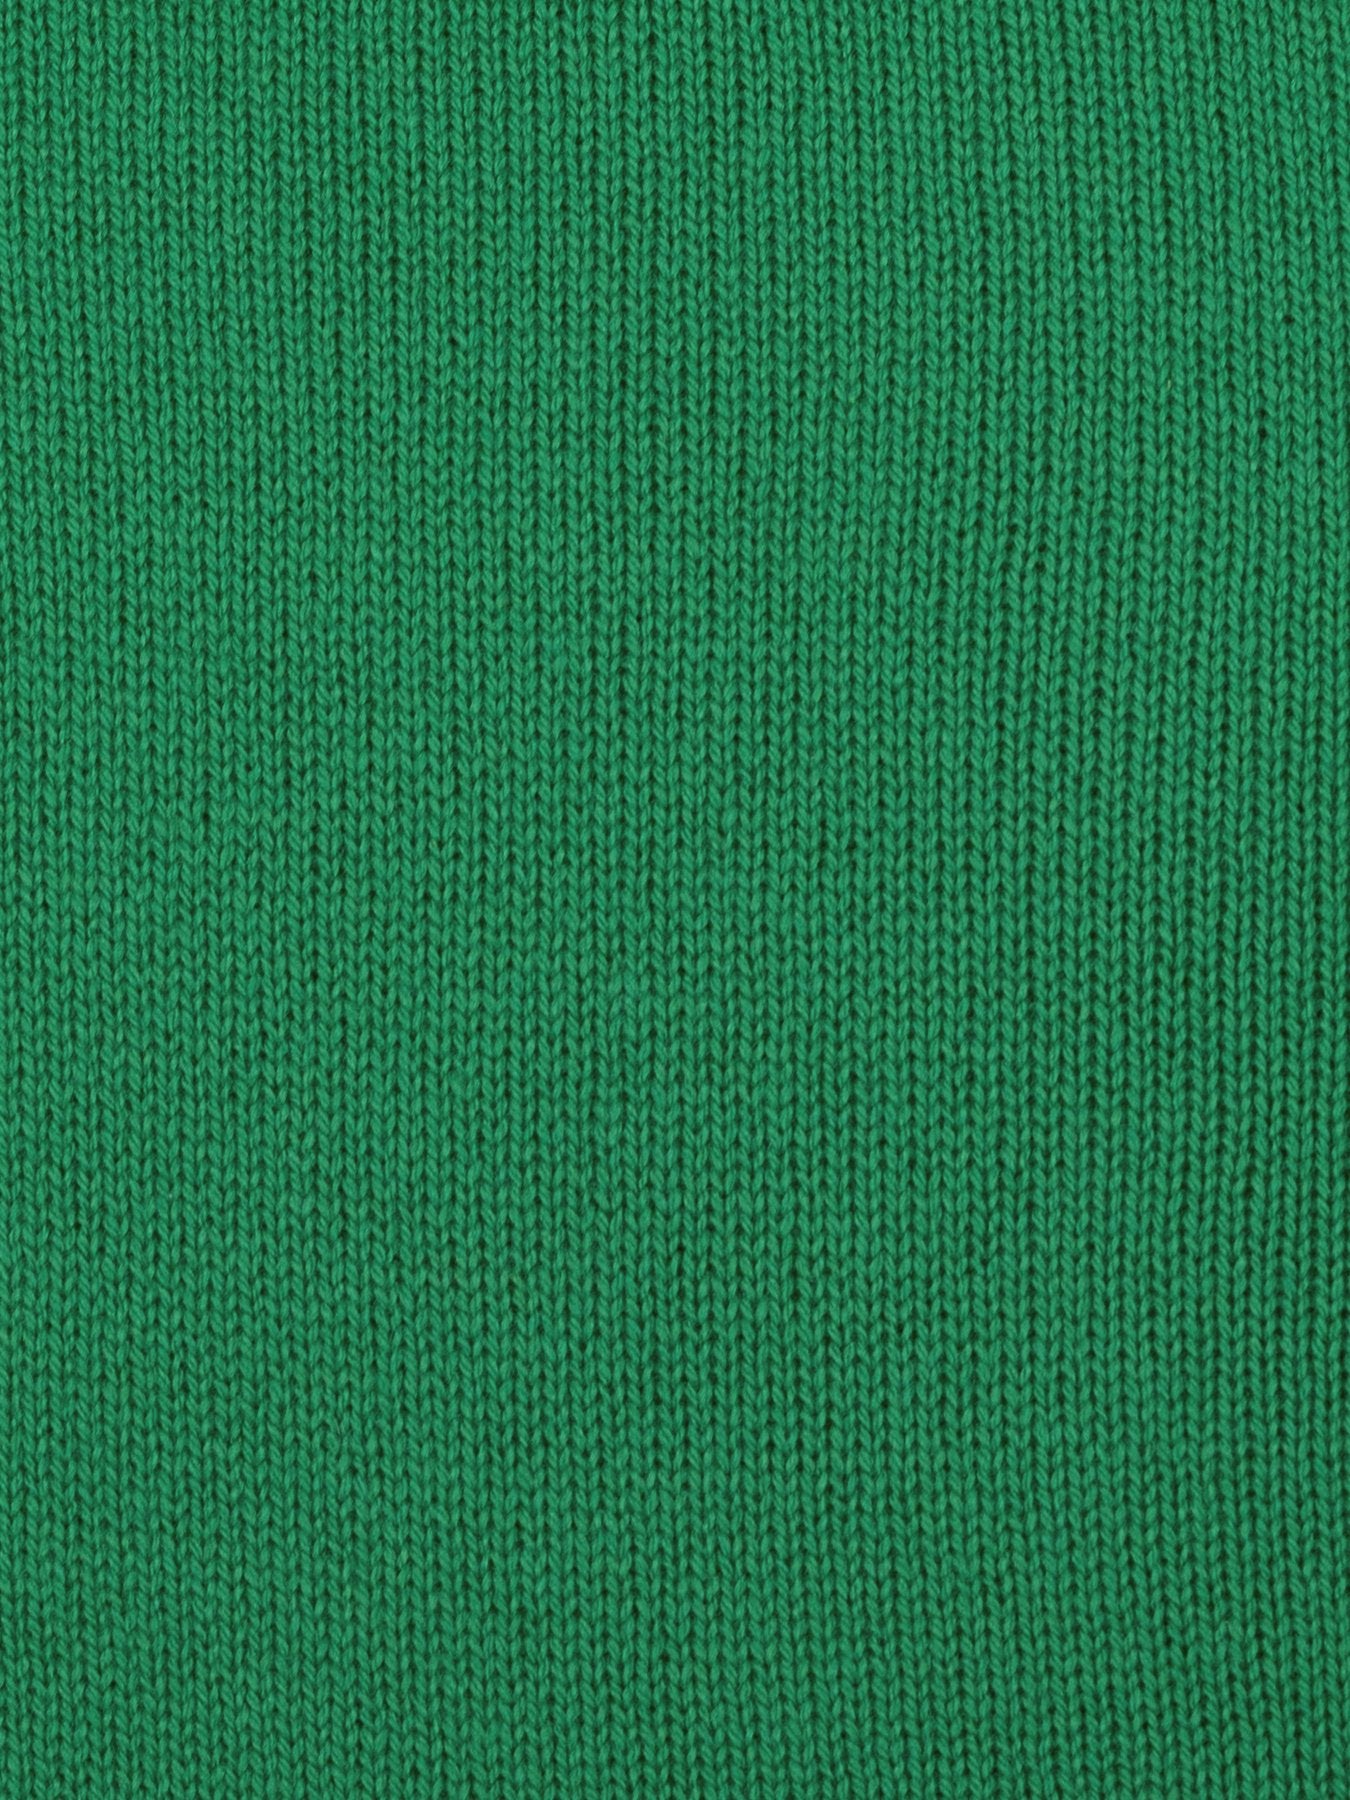 a swatch of plain single jersey knitting made from fine merino wool in a green colour